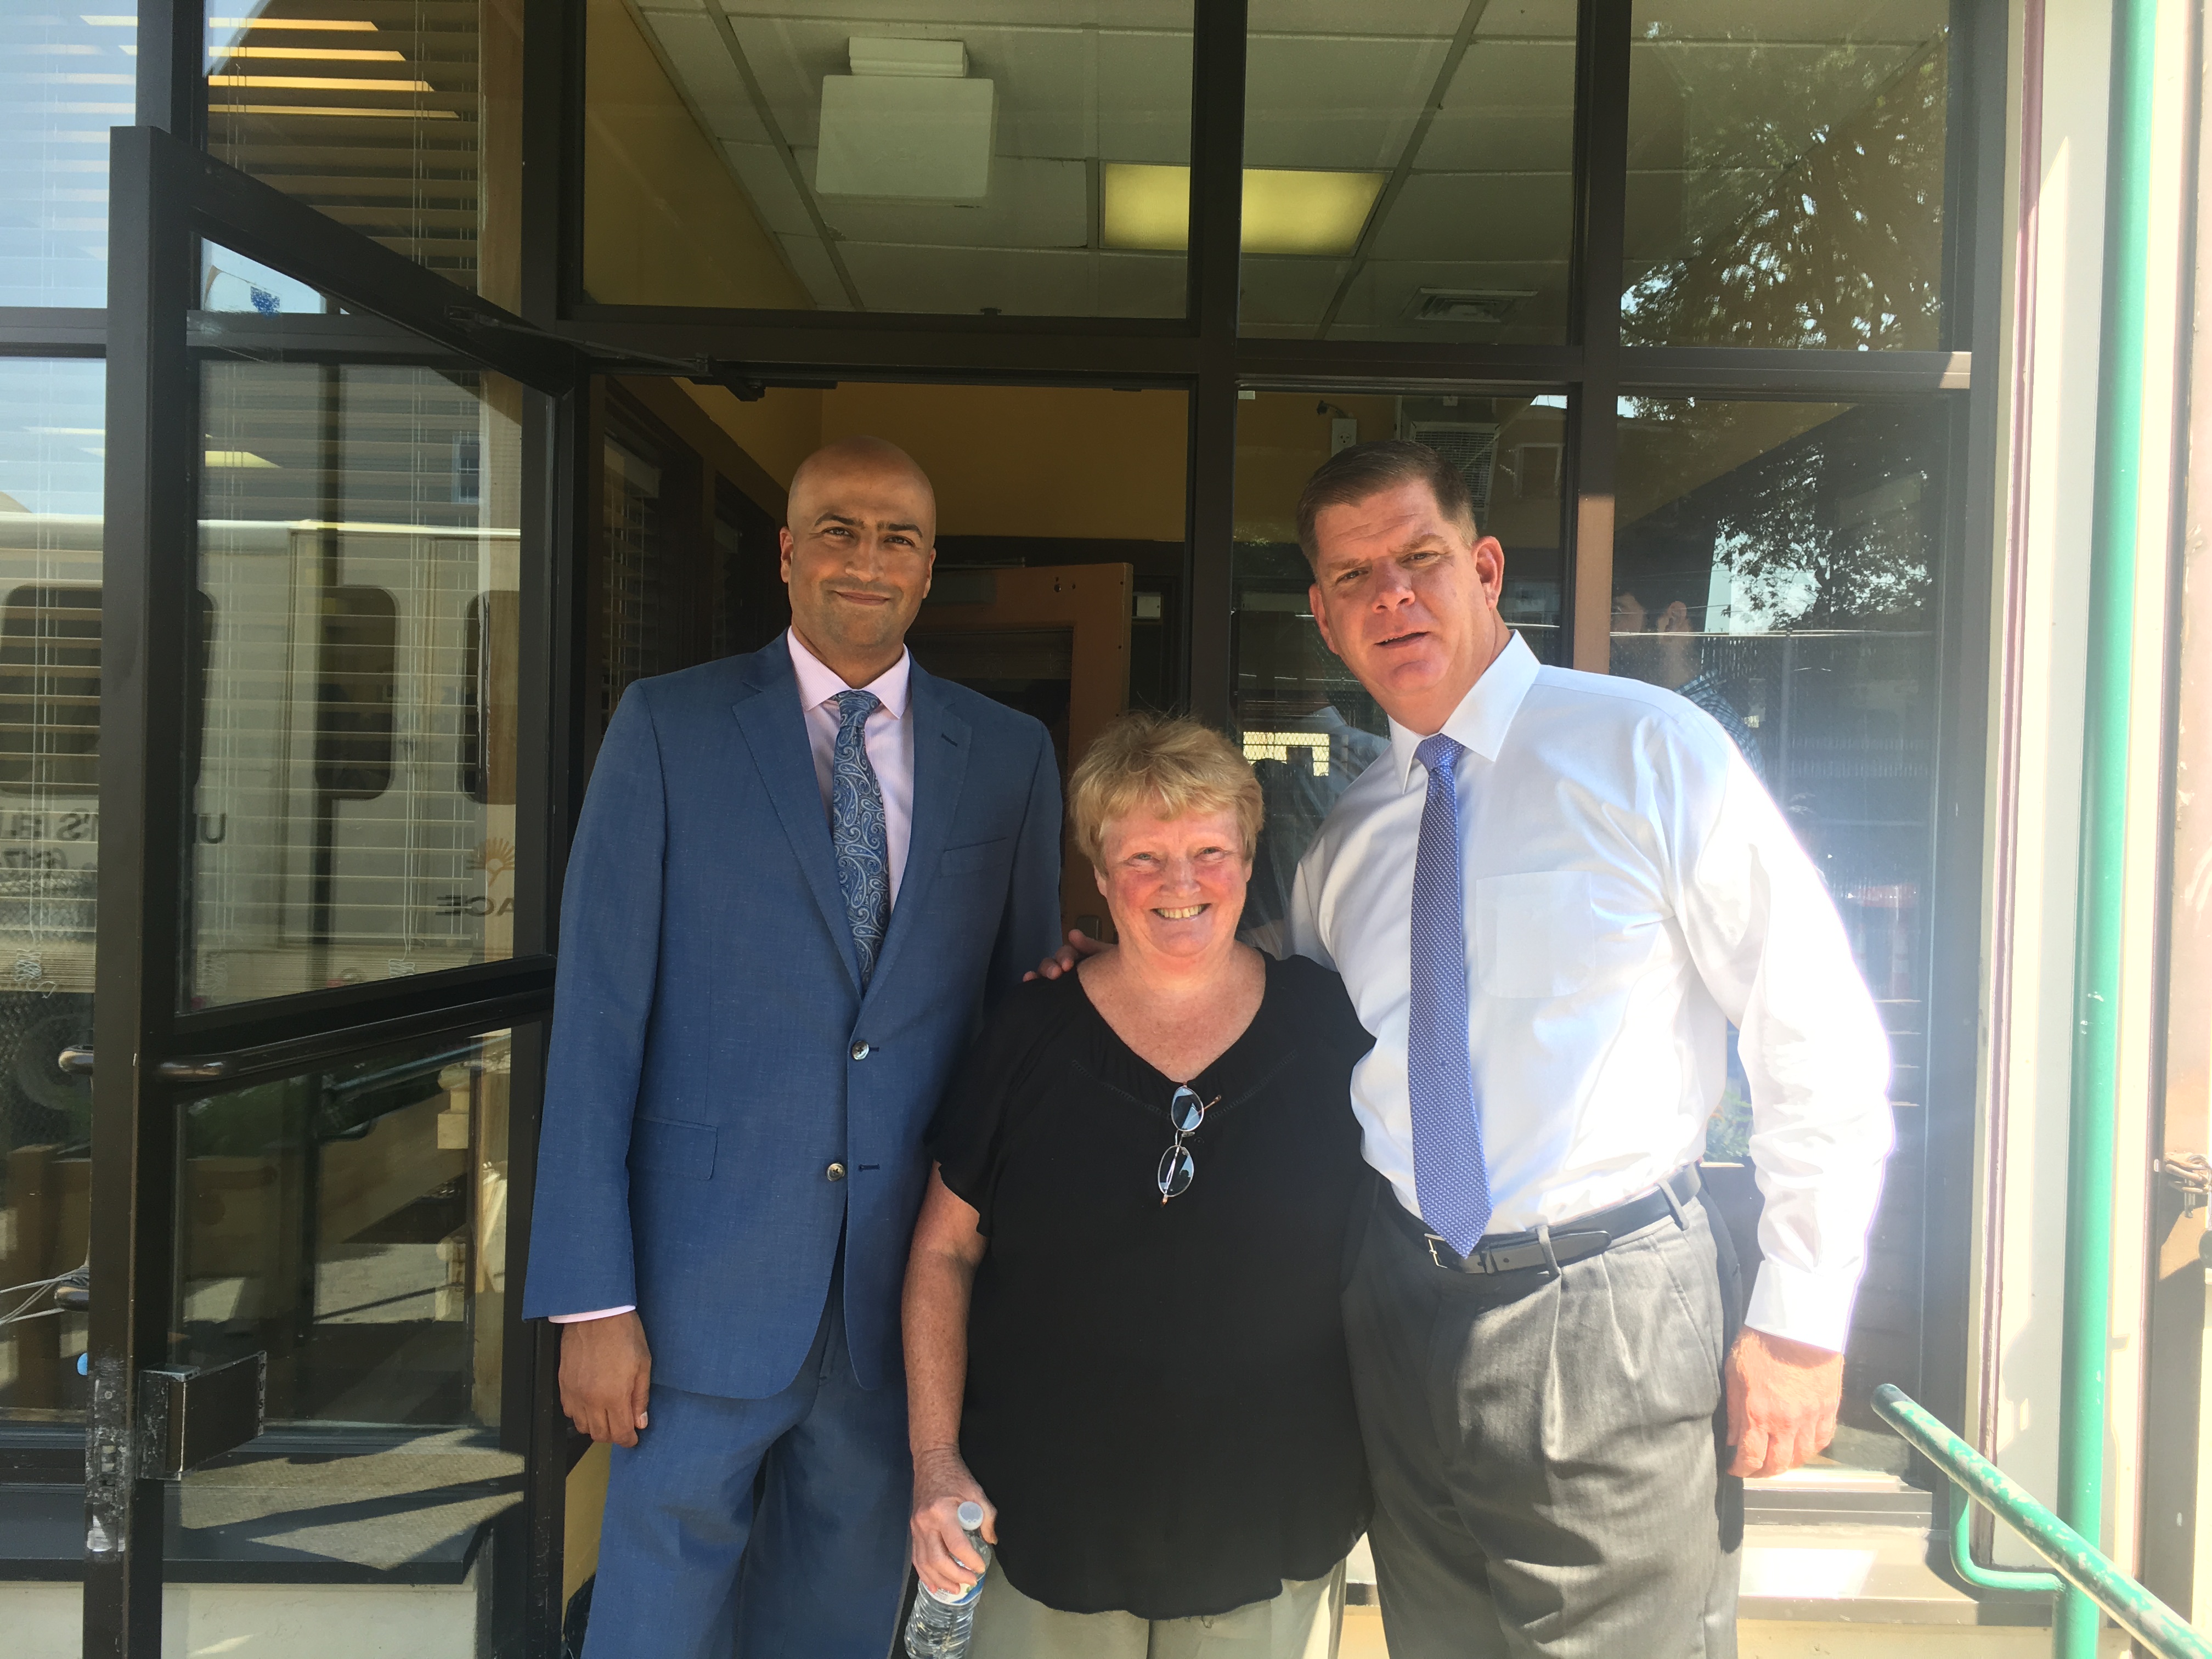 Mayor with CEO, Jay Trivedi and Margaret Leahy- Wirth, President of UCHC Board of Directors